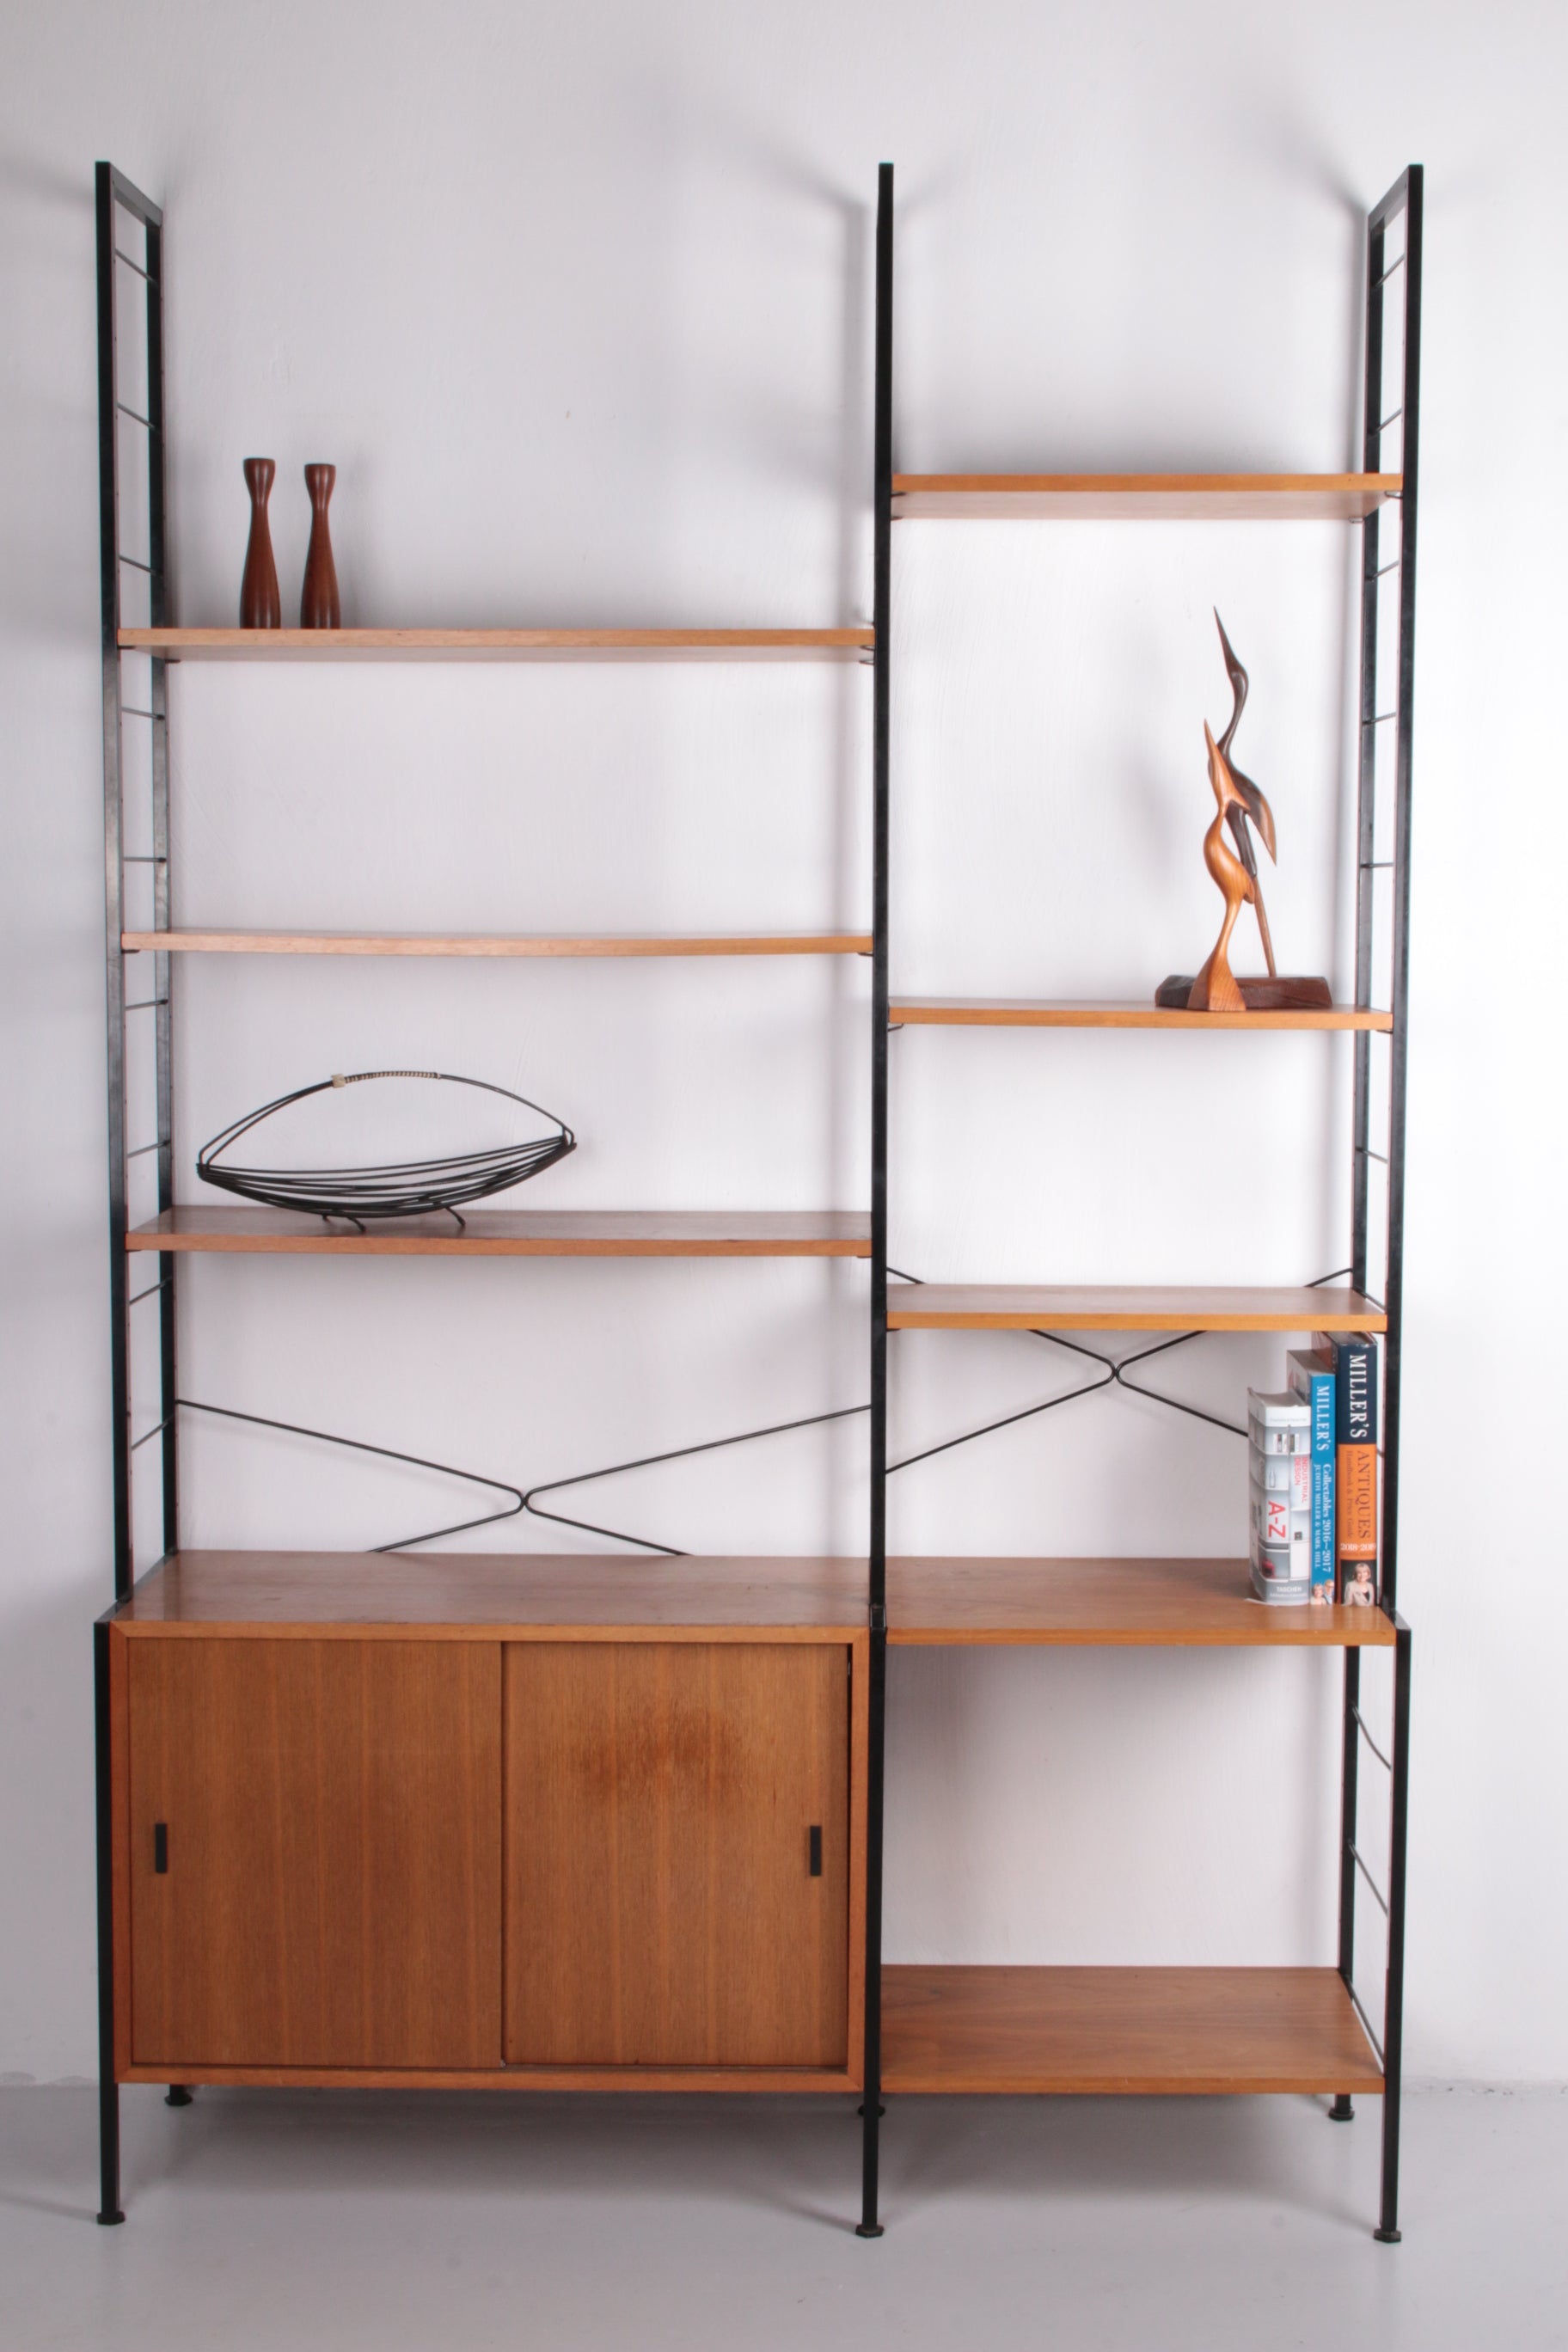 String Regal Bookcase in Germany, 1960s – Timeless-Art